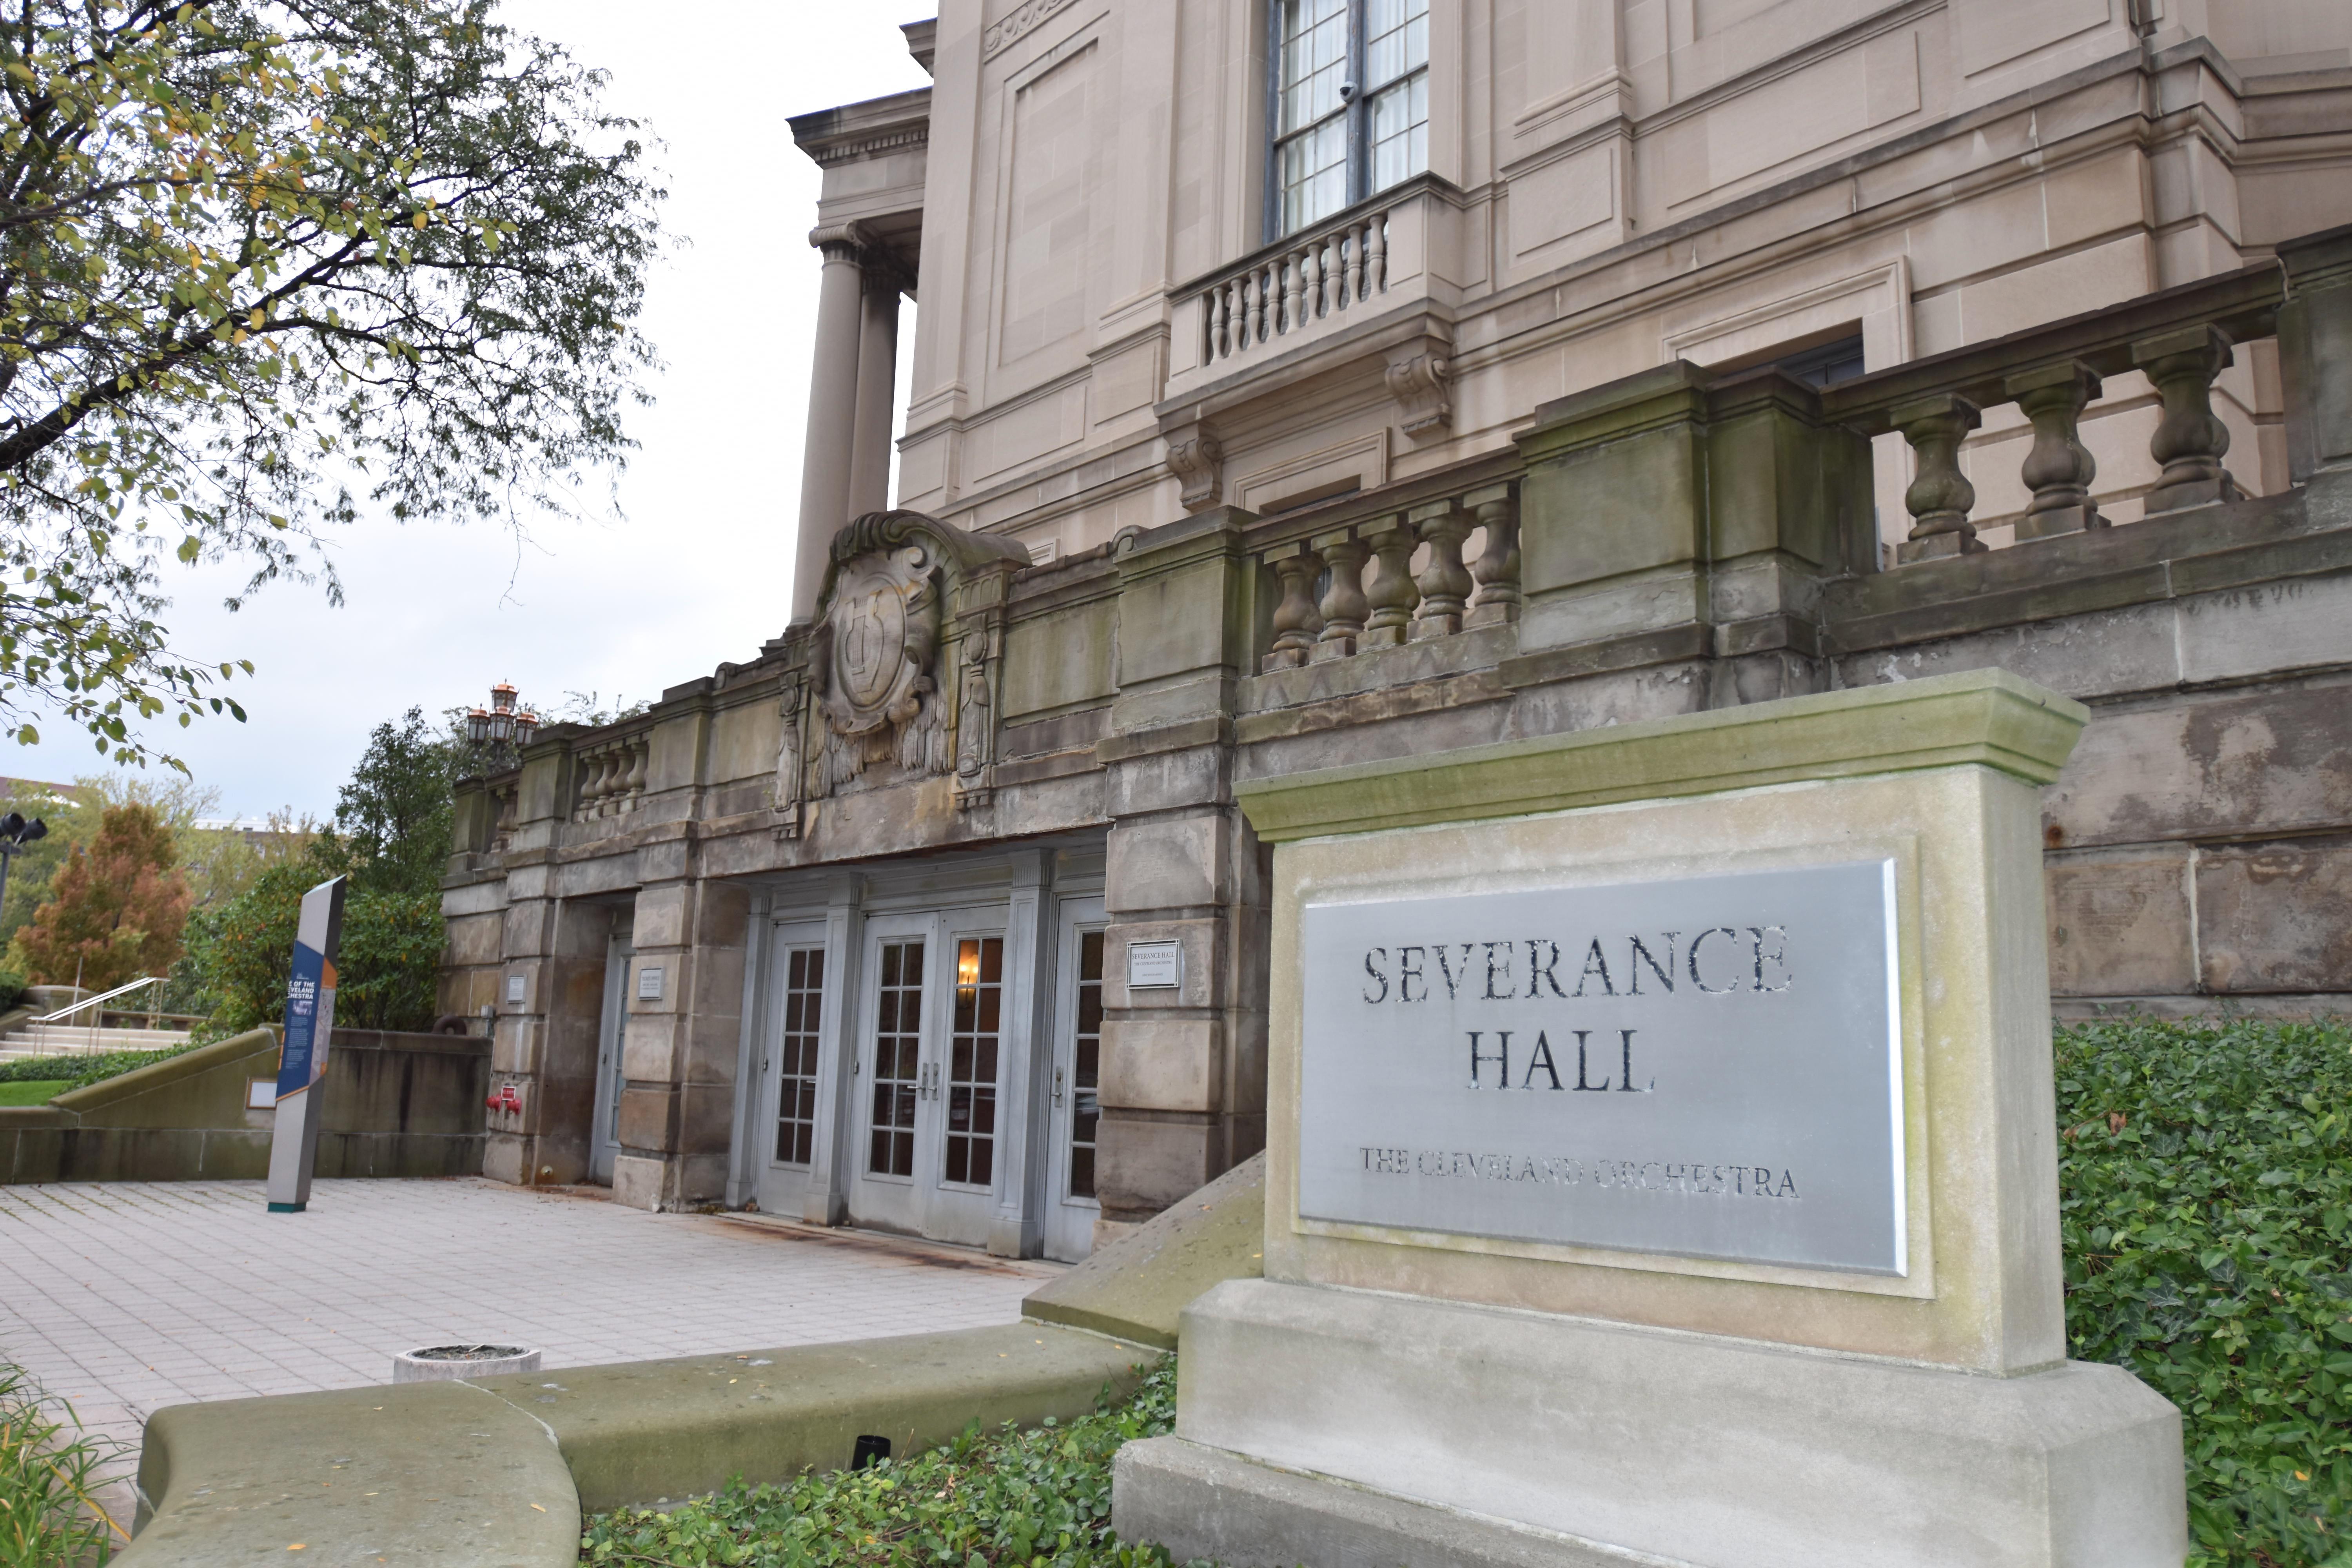 Exterior of Severance Hall off Euclid with sign